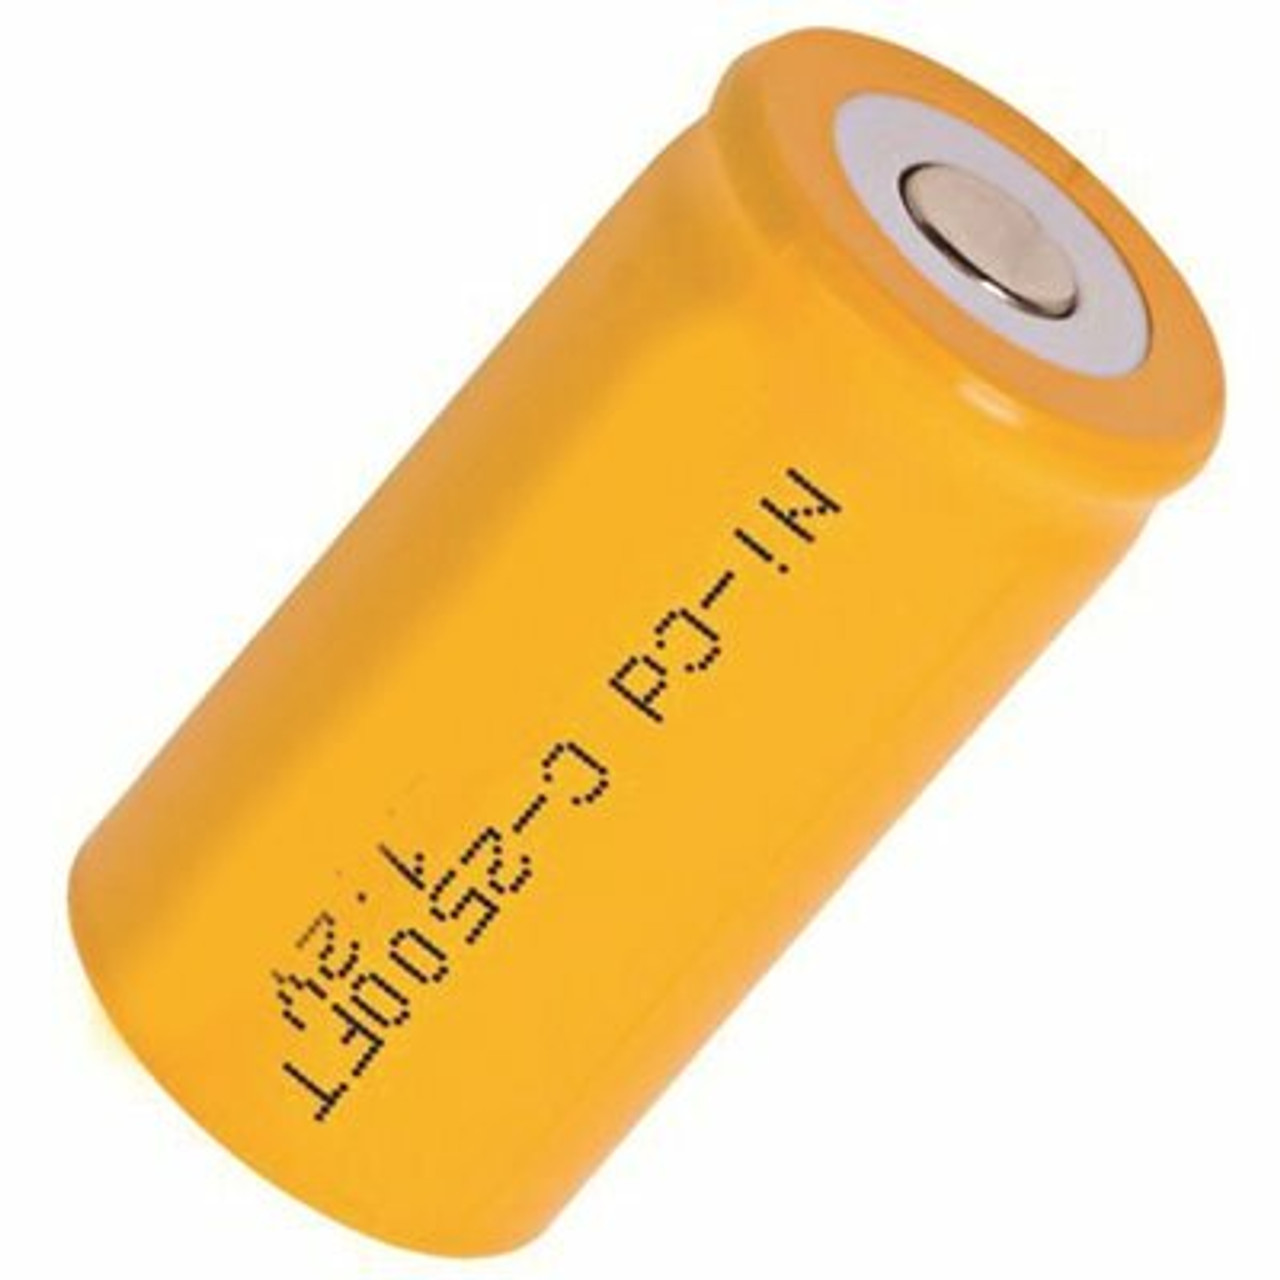 4.8-Volt 450 Mah Replacement For The Bst 102904-Mh29673 Nickel Cadmium Emergency Lighting Battery (Rechargeable)